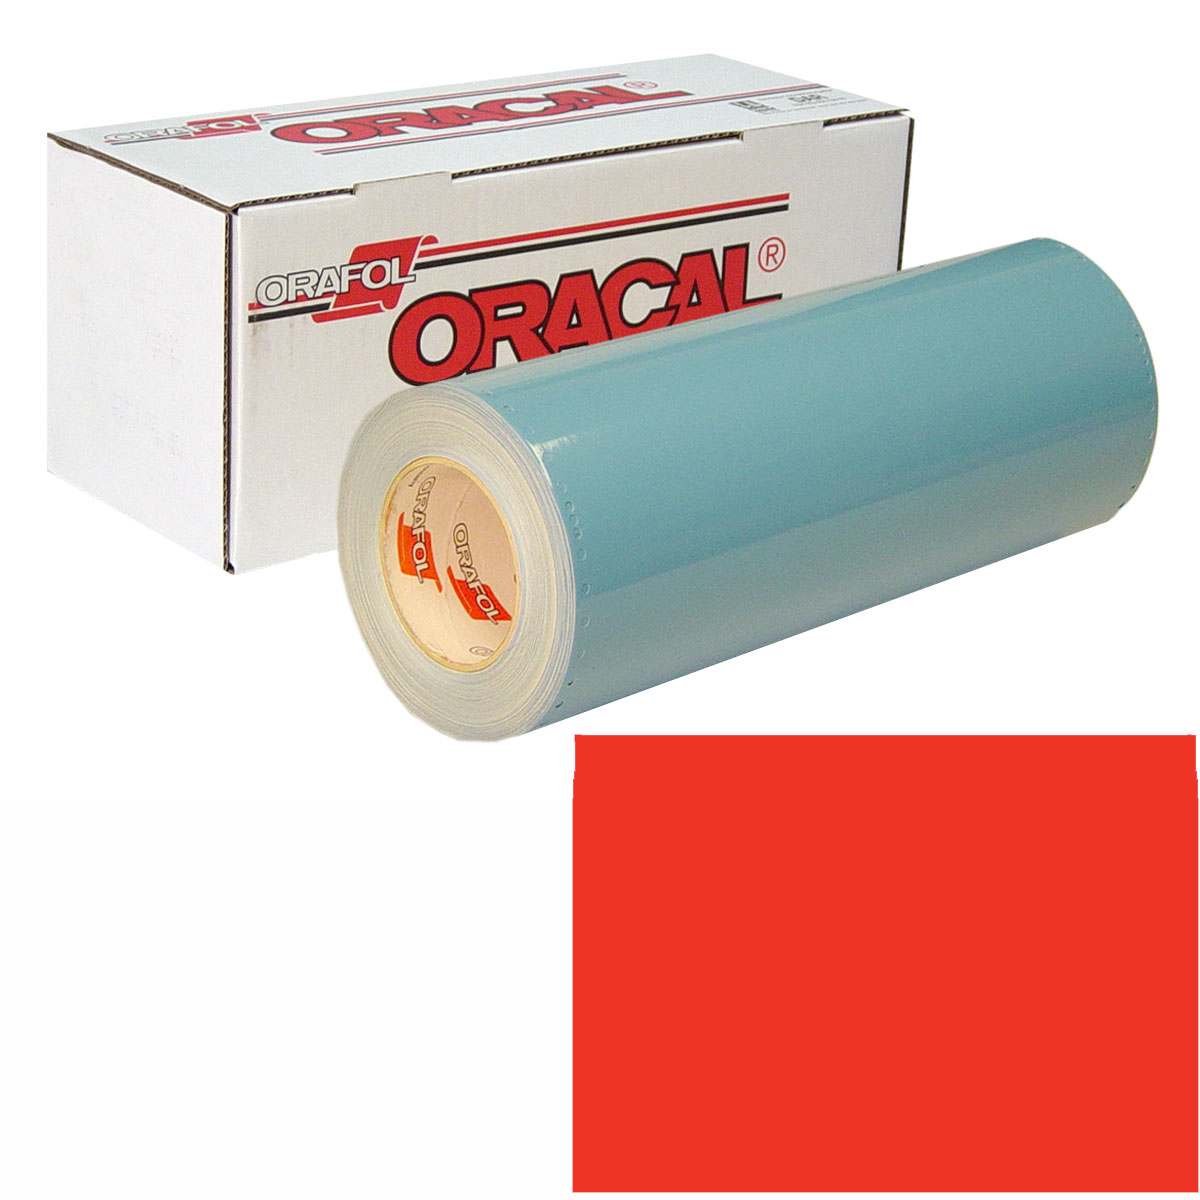 ORACAL 751RA 48in X 50yd 028 Cardinal Red